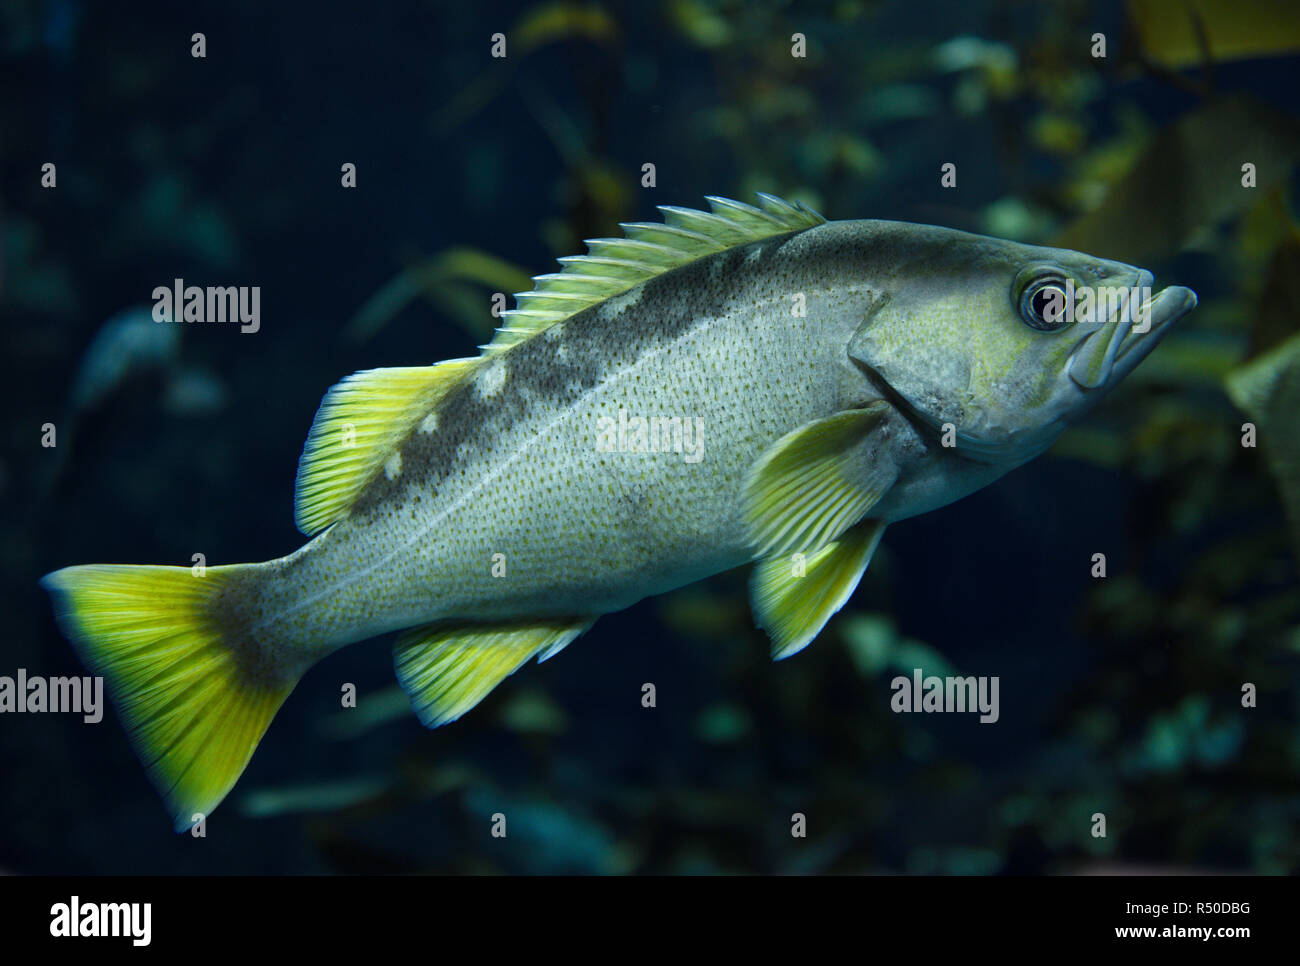 Yellowtail Rockfish with yellow fins fish in kelp forest of the North American coast Pacific ocean Stock Photo